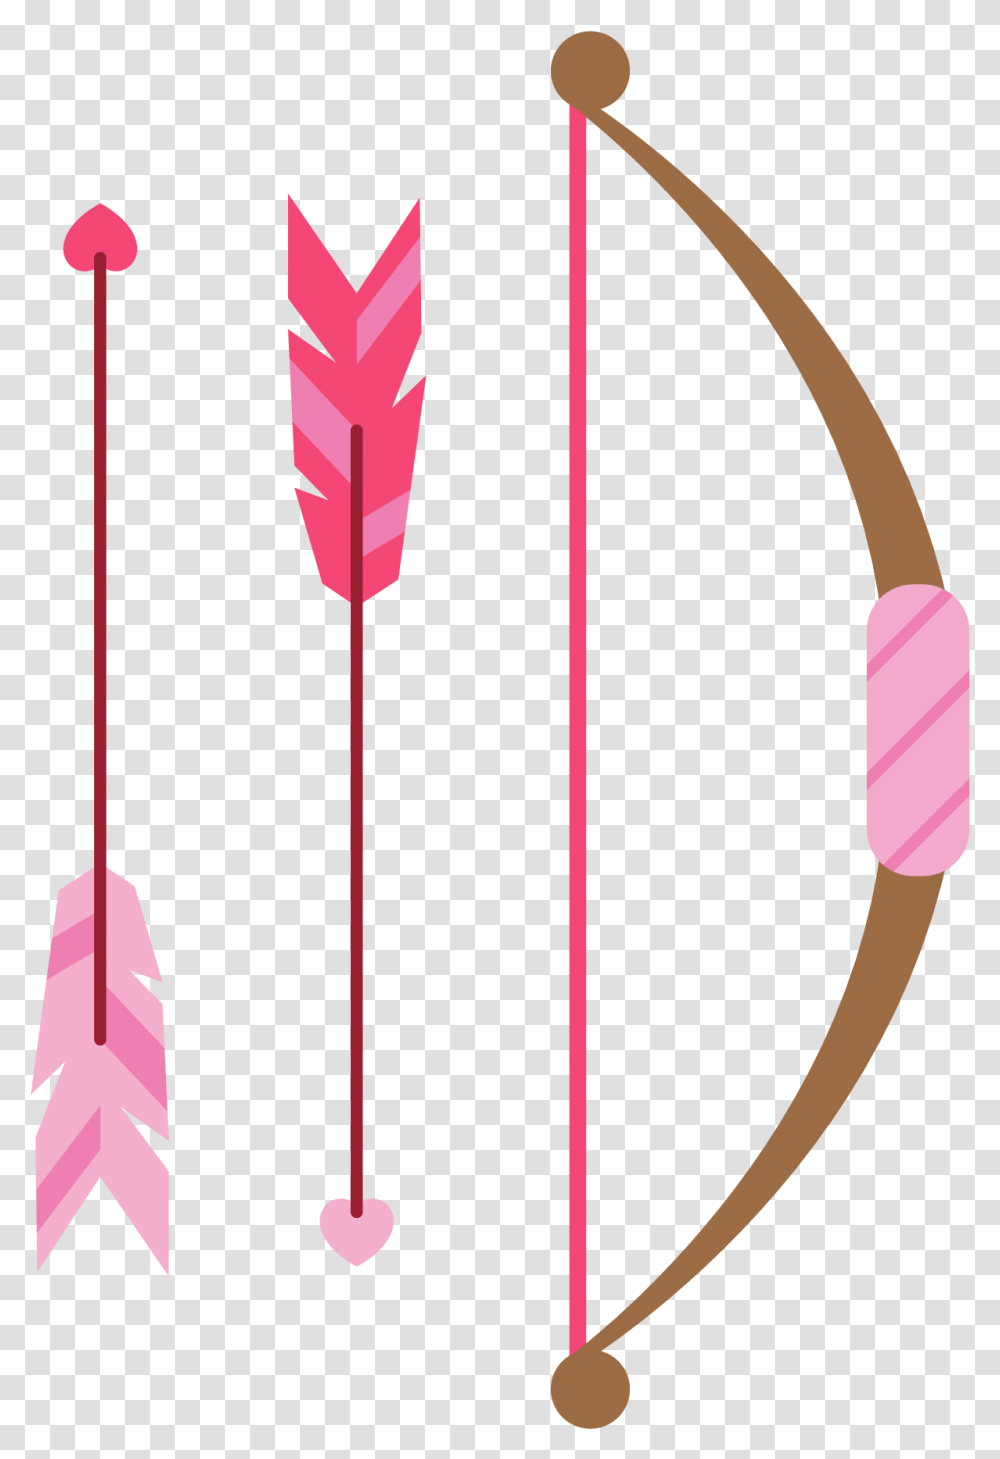 Arrow Feather Clip Art Arrow Feather Clipart Pink Feather Arrow, Symbol, Bow Transparent Png